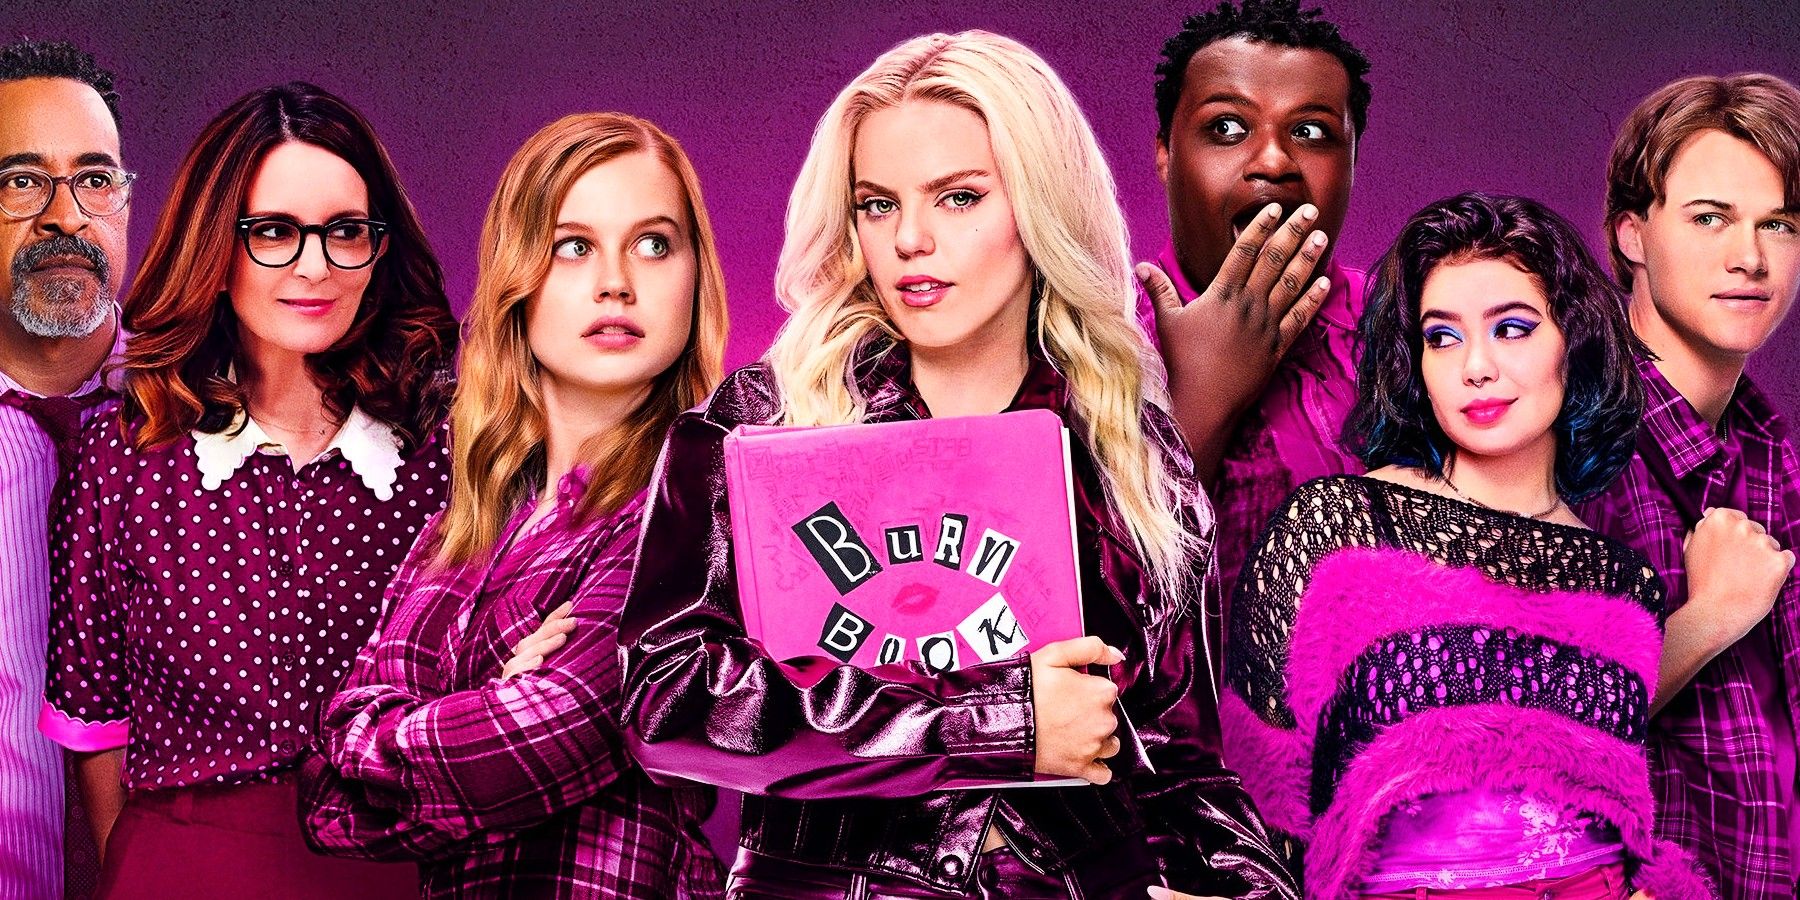 The New Mean Girls Fun, Fresh, and Surprising